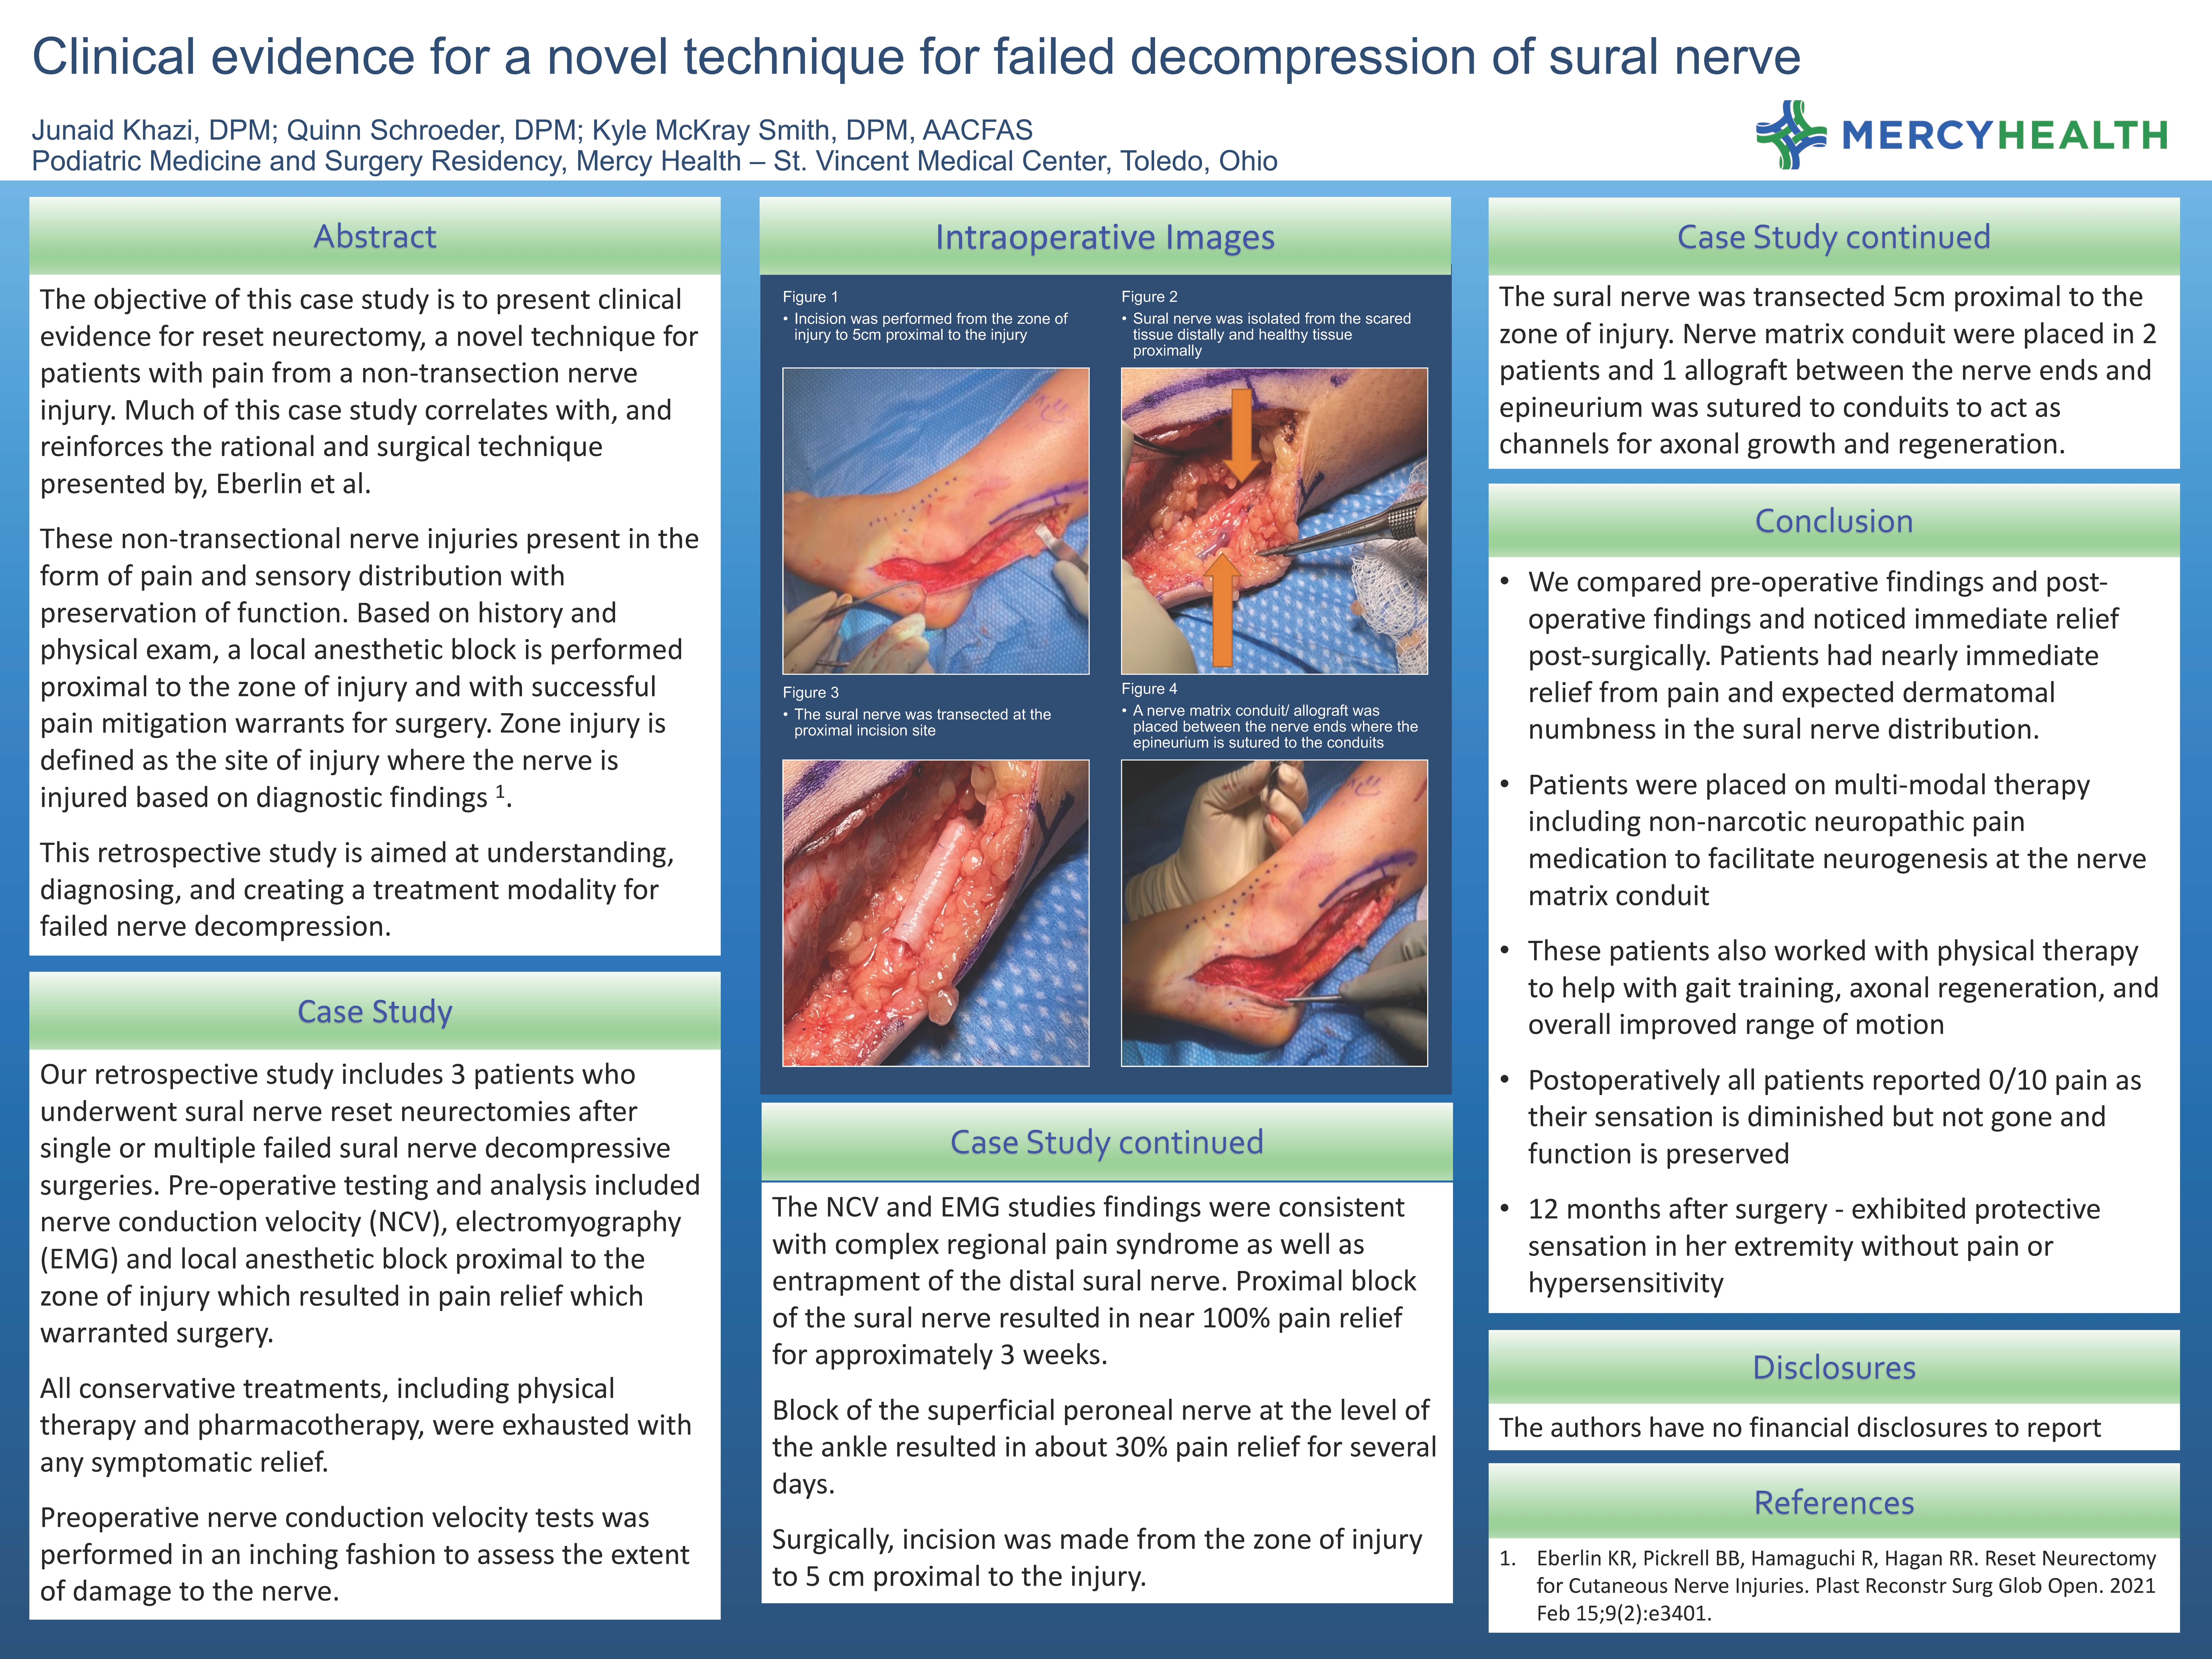 Clinical Evidence for a Novel Technique for Failed Decompression of Sural Nerve